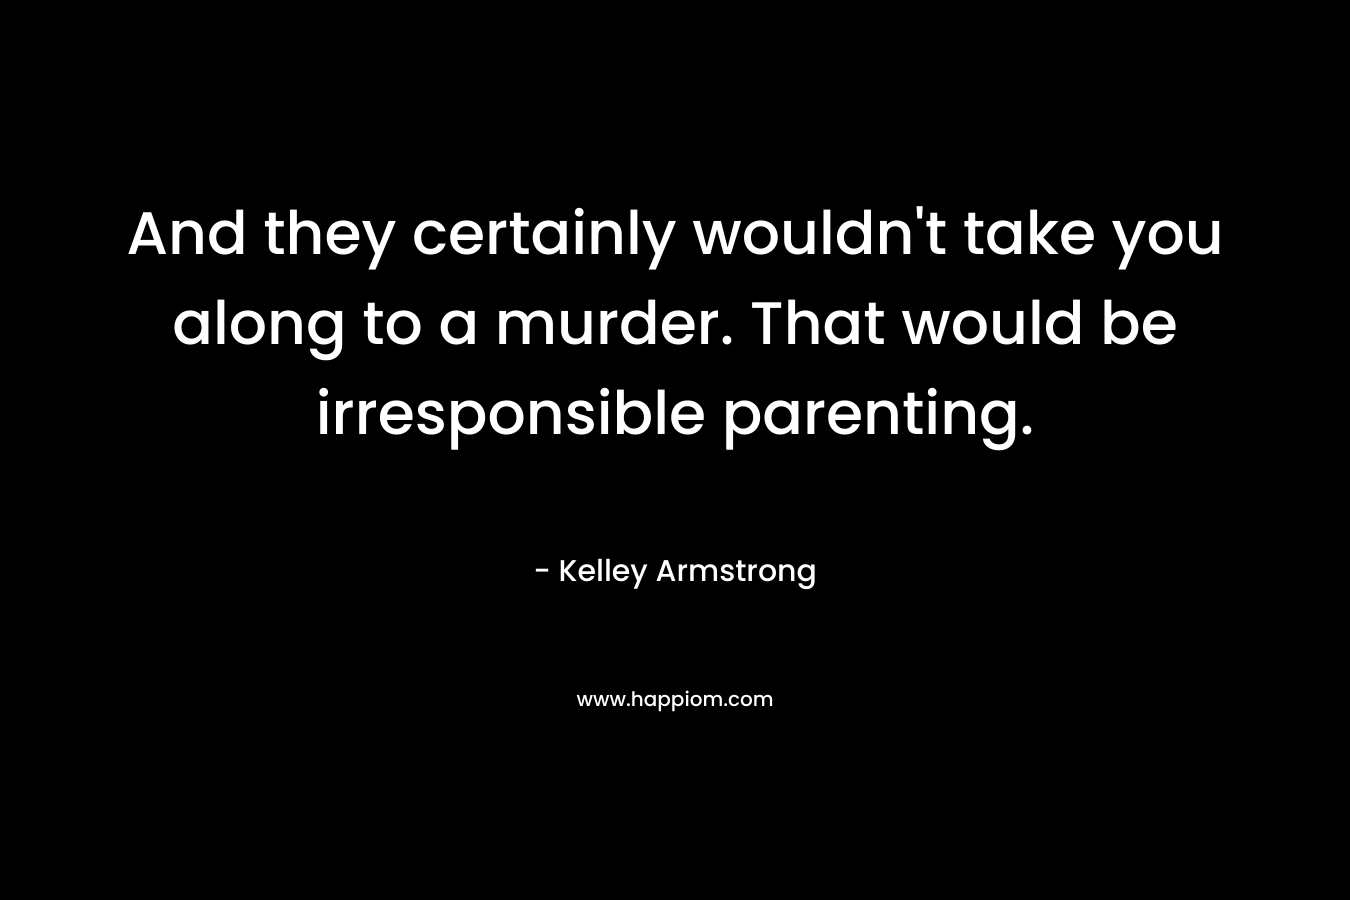 And they certainly wouldn't take you along to a murder. That would be irresponsible parenting.